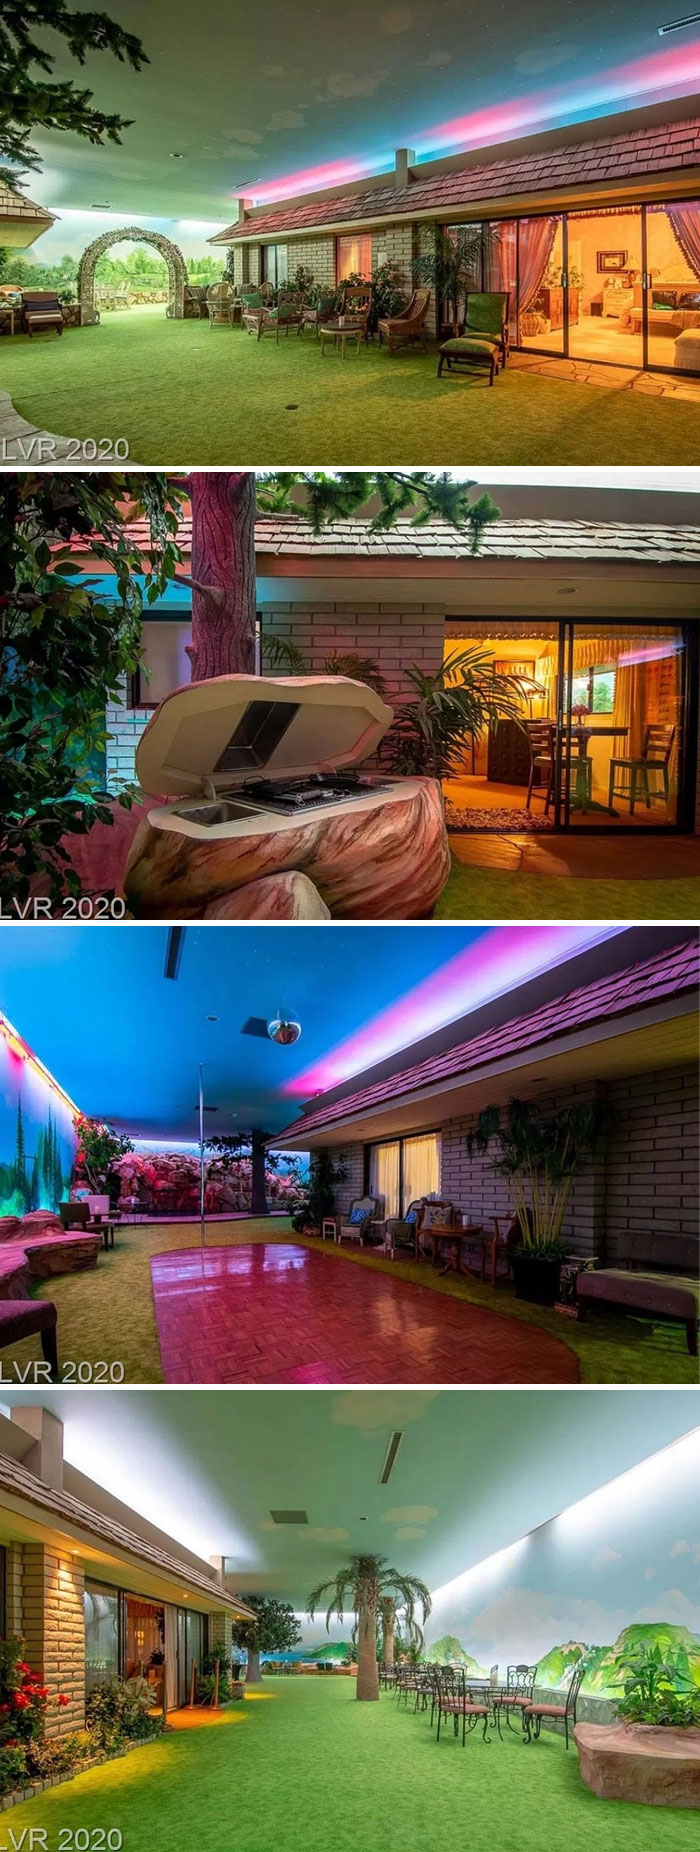 Hey Have You Guys Ever Seen That House In Las Vegas With A 15,000 Sqft Underground Bunker Built To Look Like A 1960's Ranch? Yeah, Well, It's For Sale